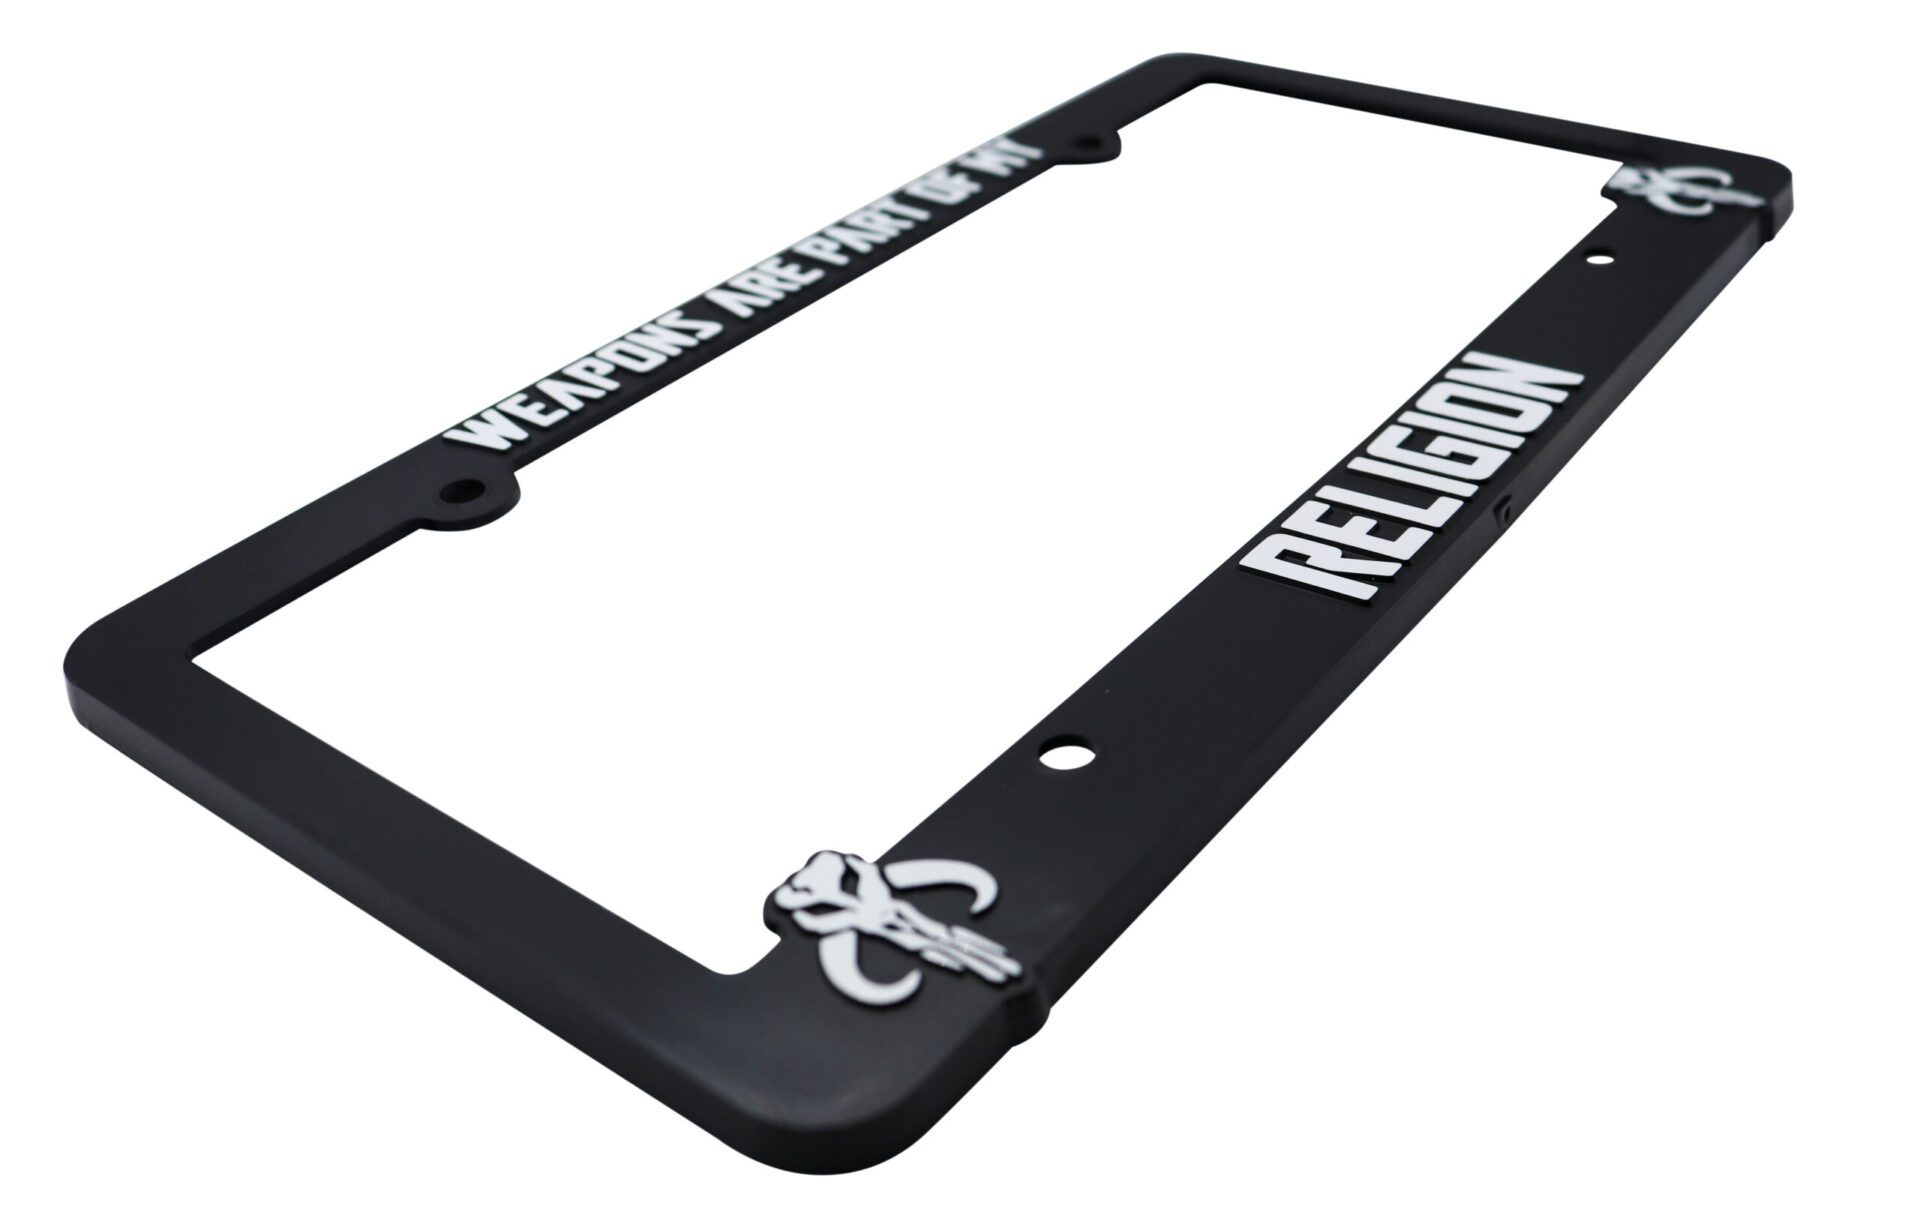 Weapons Are Part Of My Religion 3D Raised License Plate Frame